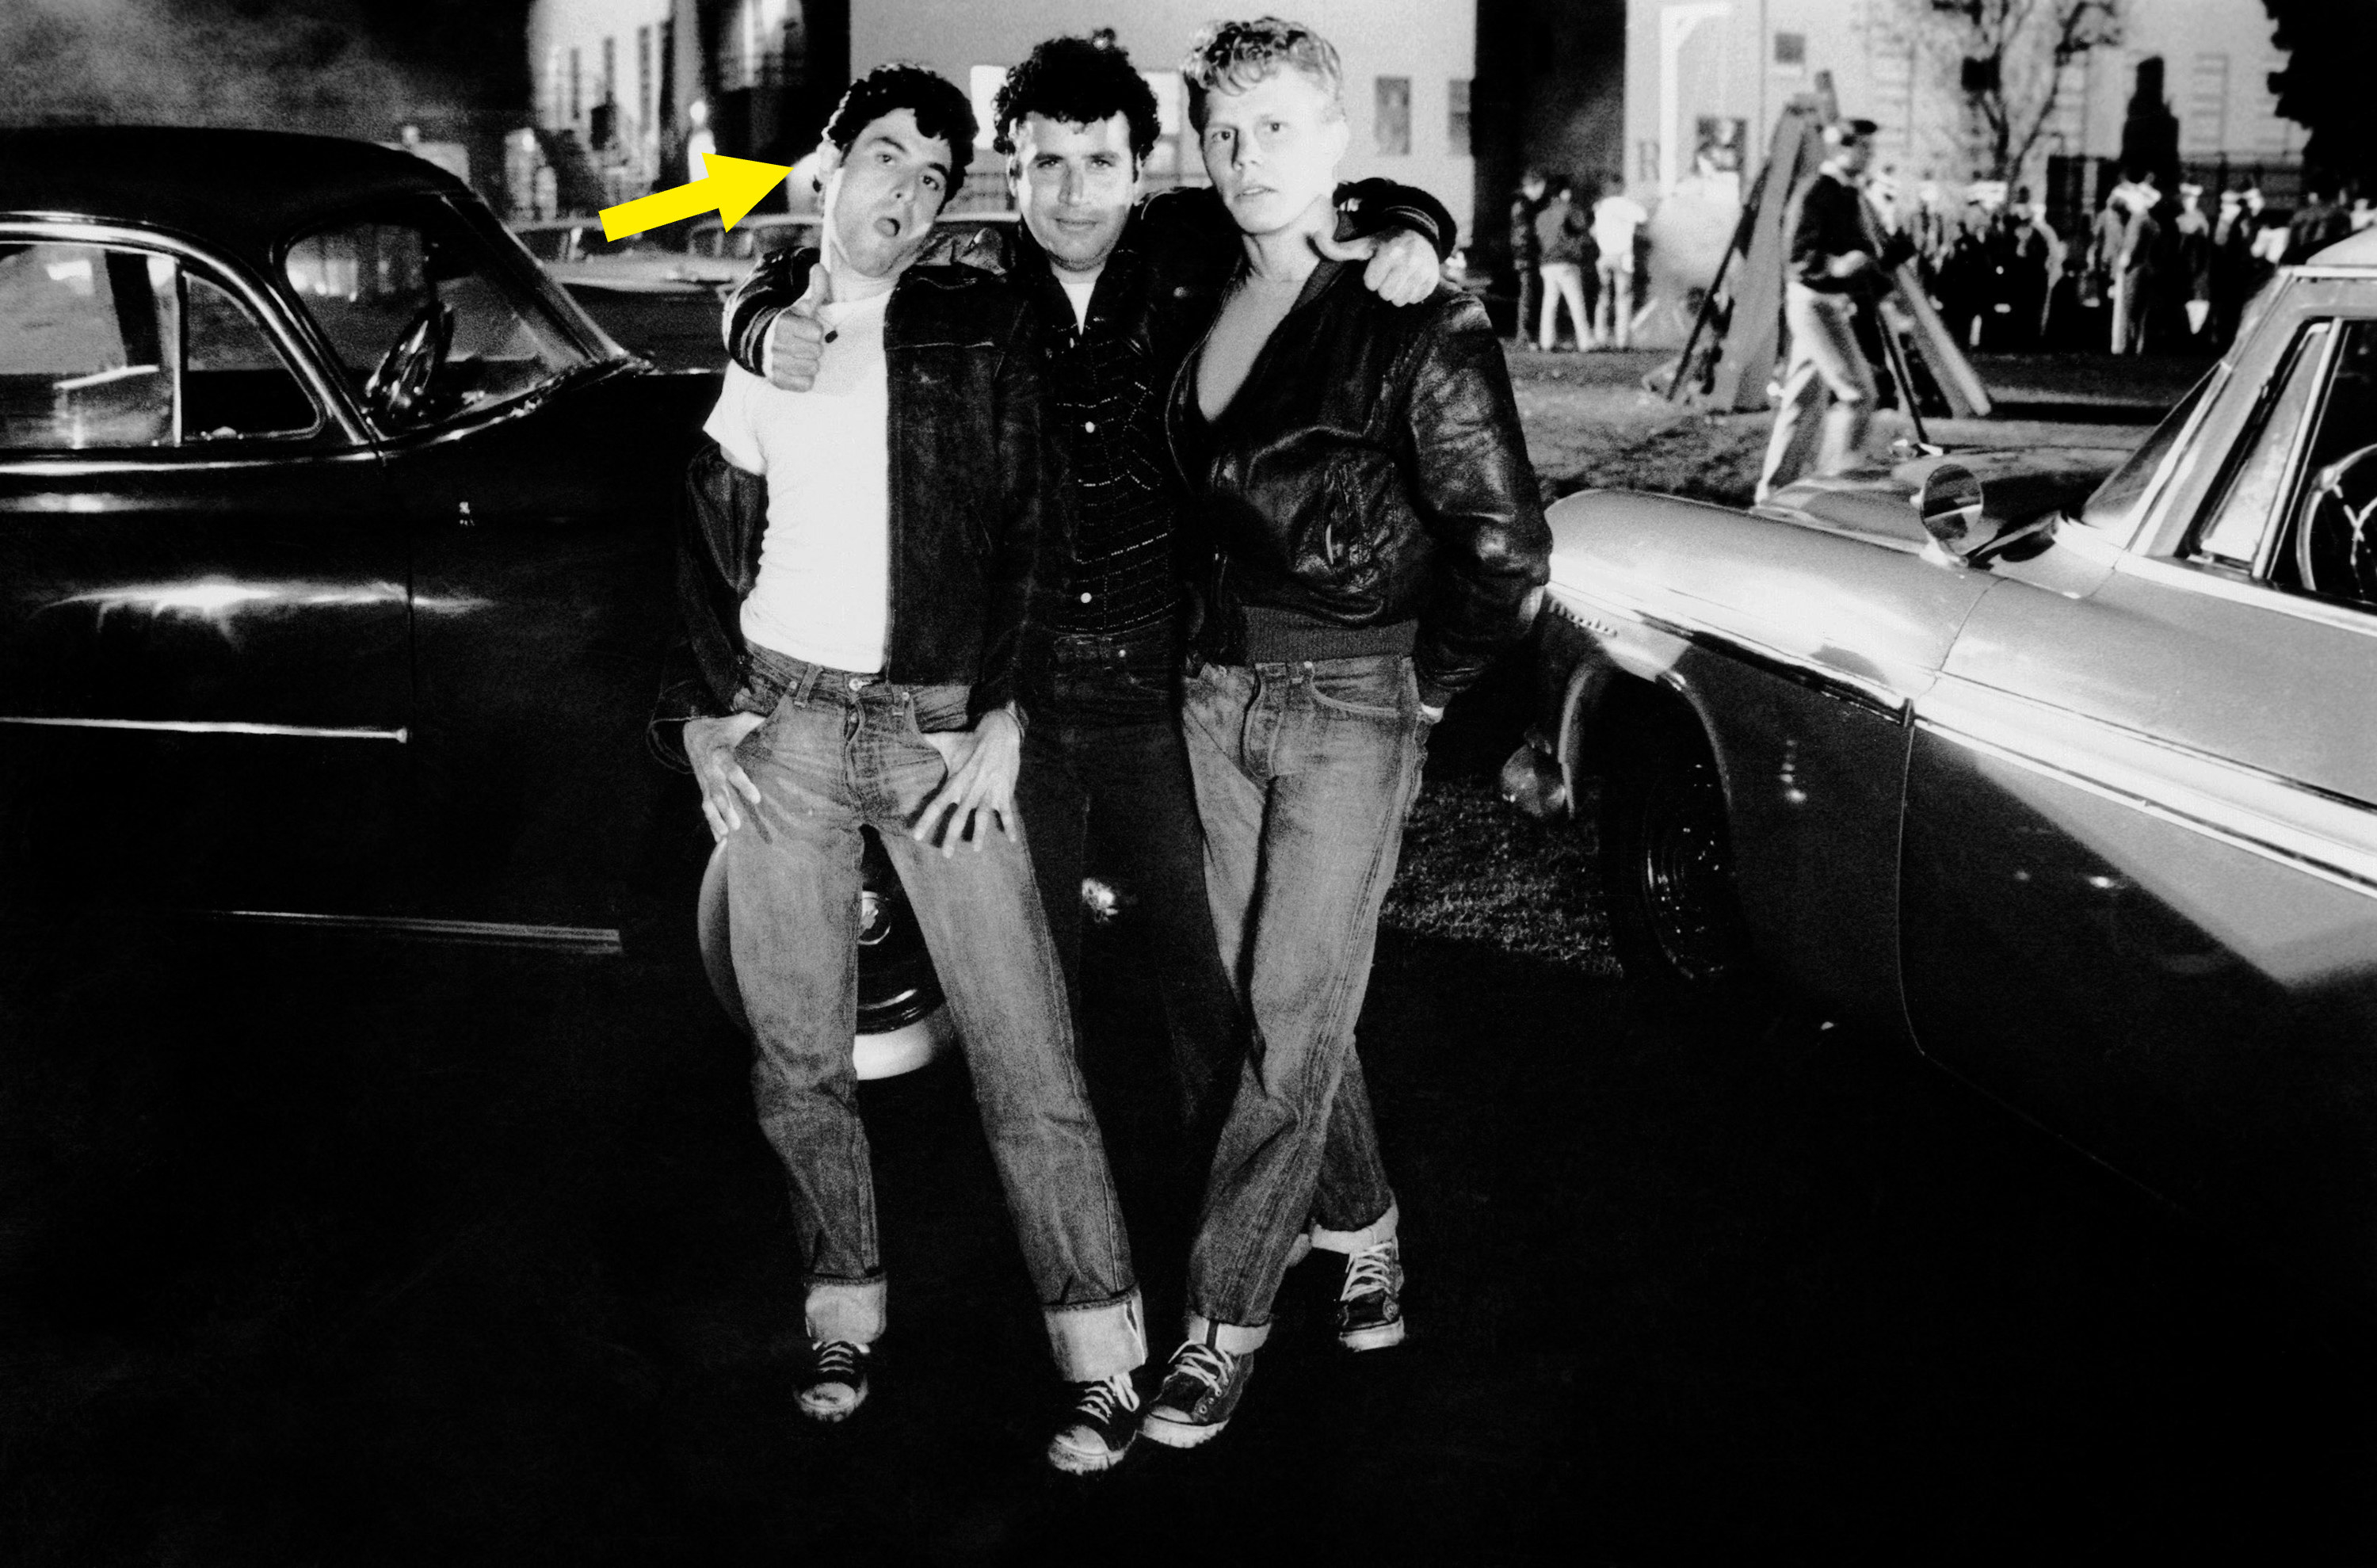 Barry Pearl, Michael Tucci, and Kelly Ward in Grease